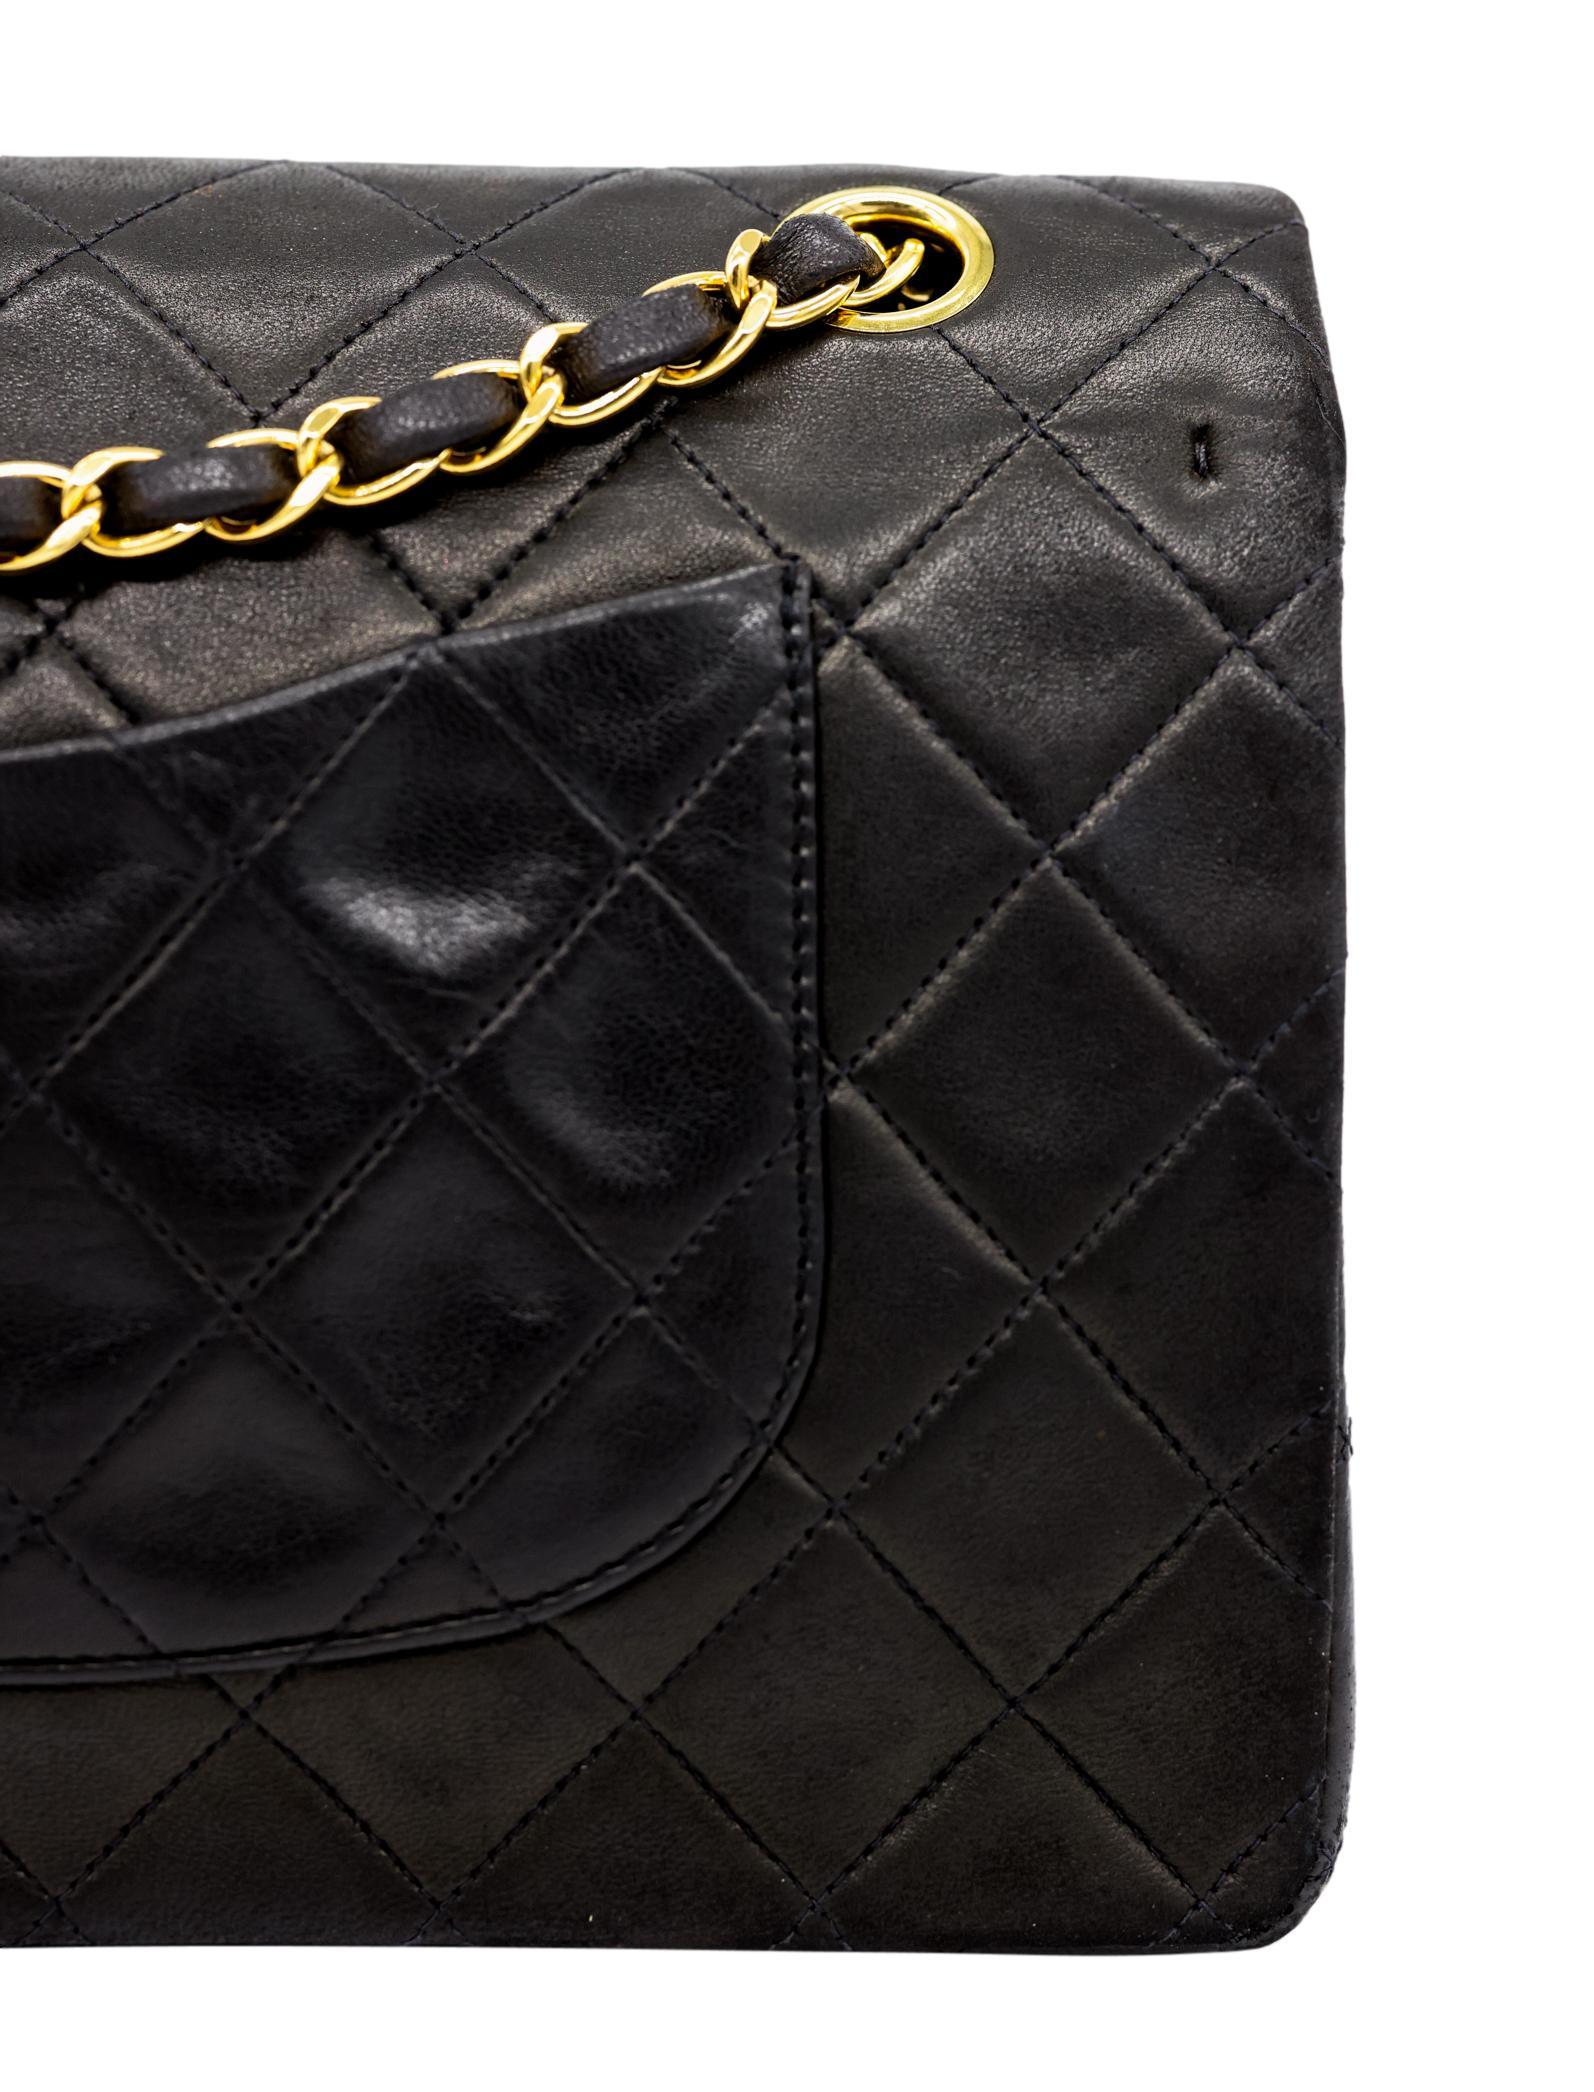 Chanel Timeless Black Medium Double Flap Quilted Lambskin Shoulder Bag, 2019. 6